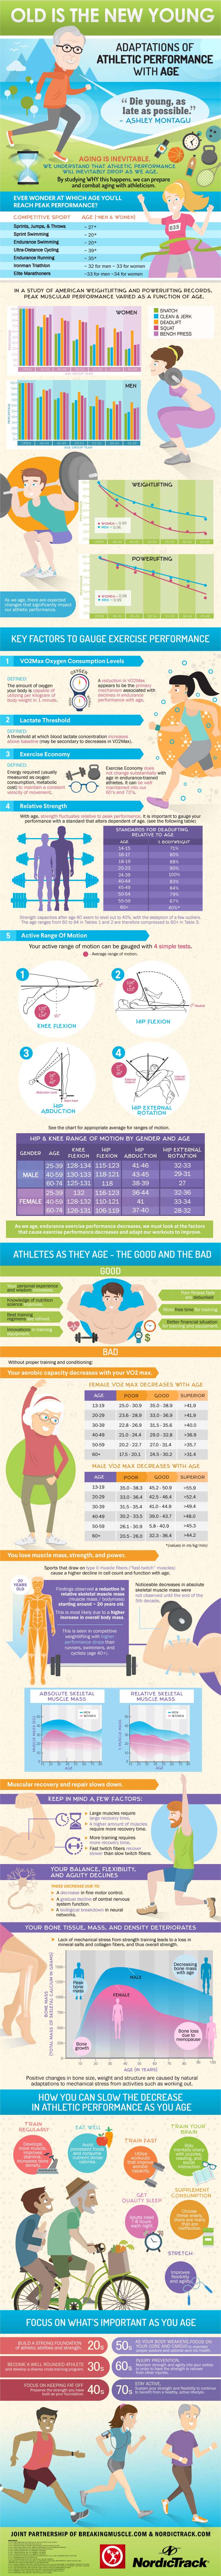 Old is the New Young: Adaptions for Athletic Performance with Age